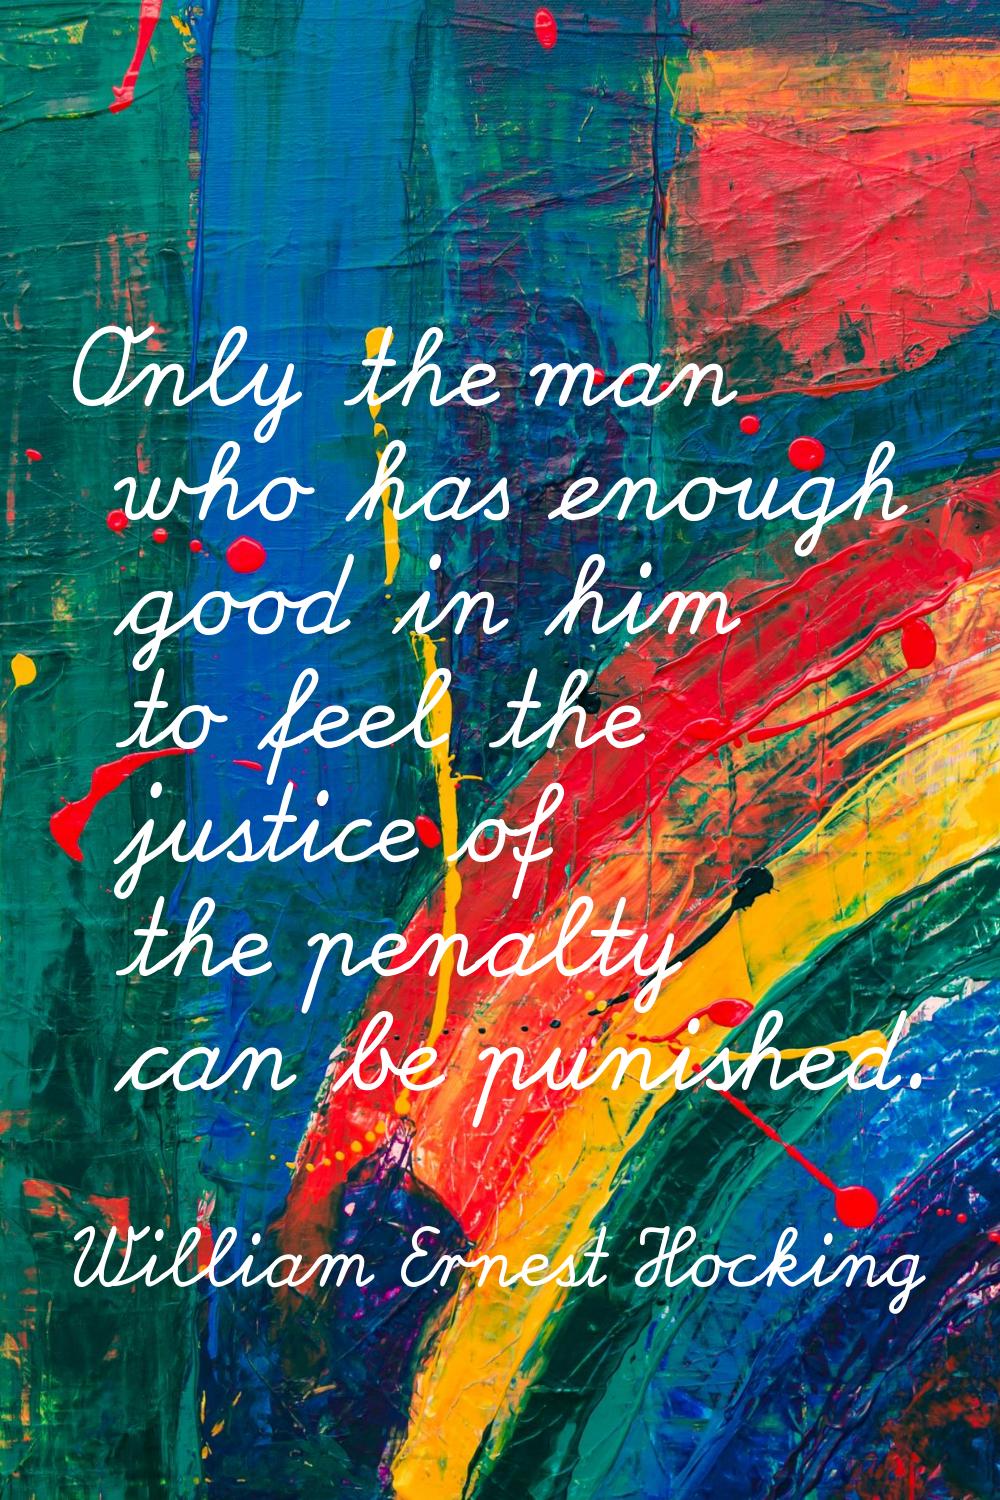 Only the man who has enough good in him to feel the justice of the penalty can be punished.